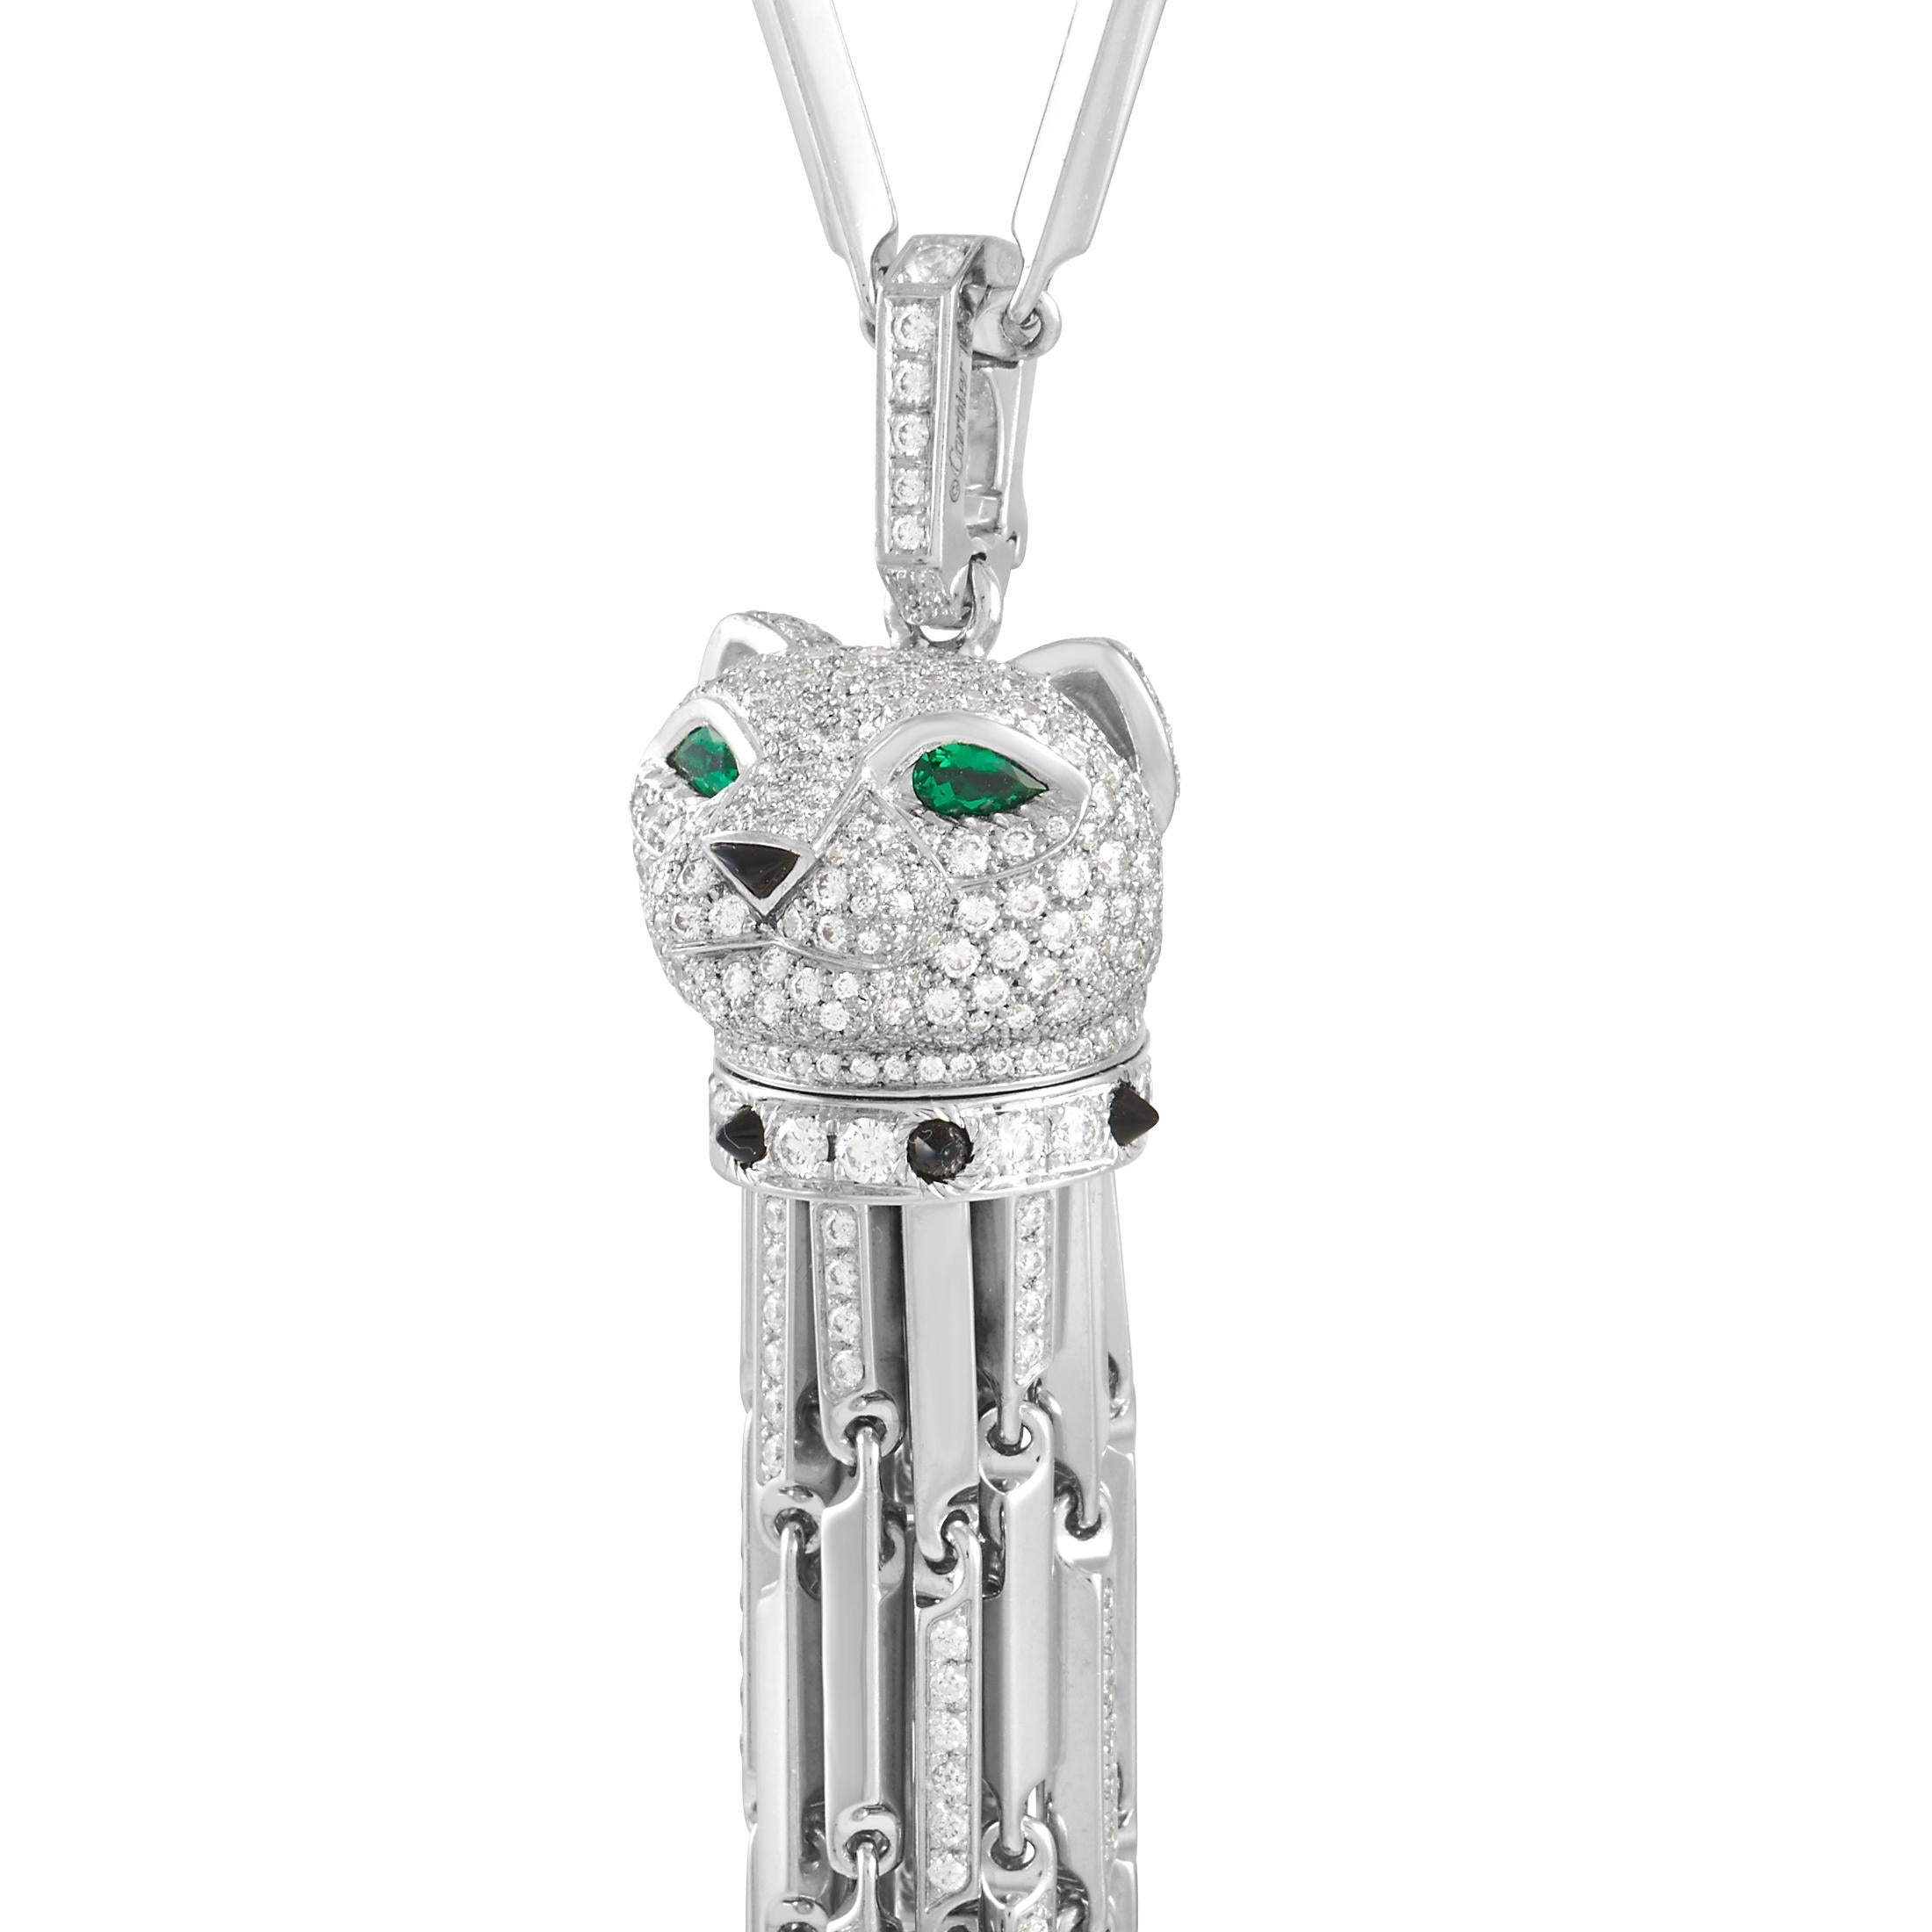 This exciting Cartier Panthere Pendant Necklace puts luxury boldly on display. Attached to a unique linked chain measuring 30” long, you’ll find a fabulous diamond-encrusted panther head with green eyes and a black studded “collar”. Chain tassels